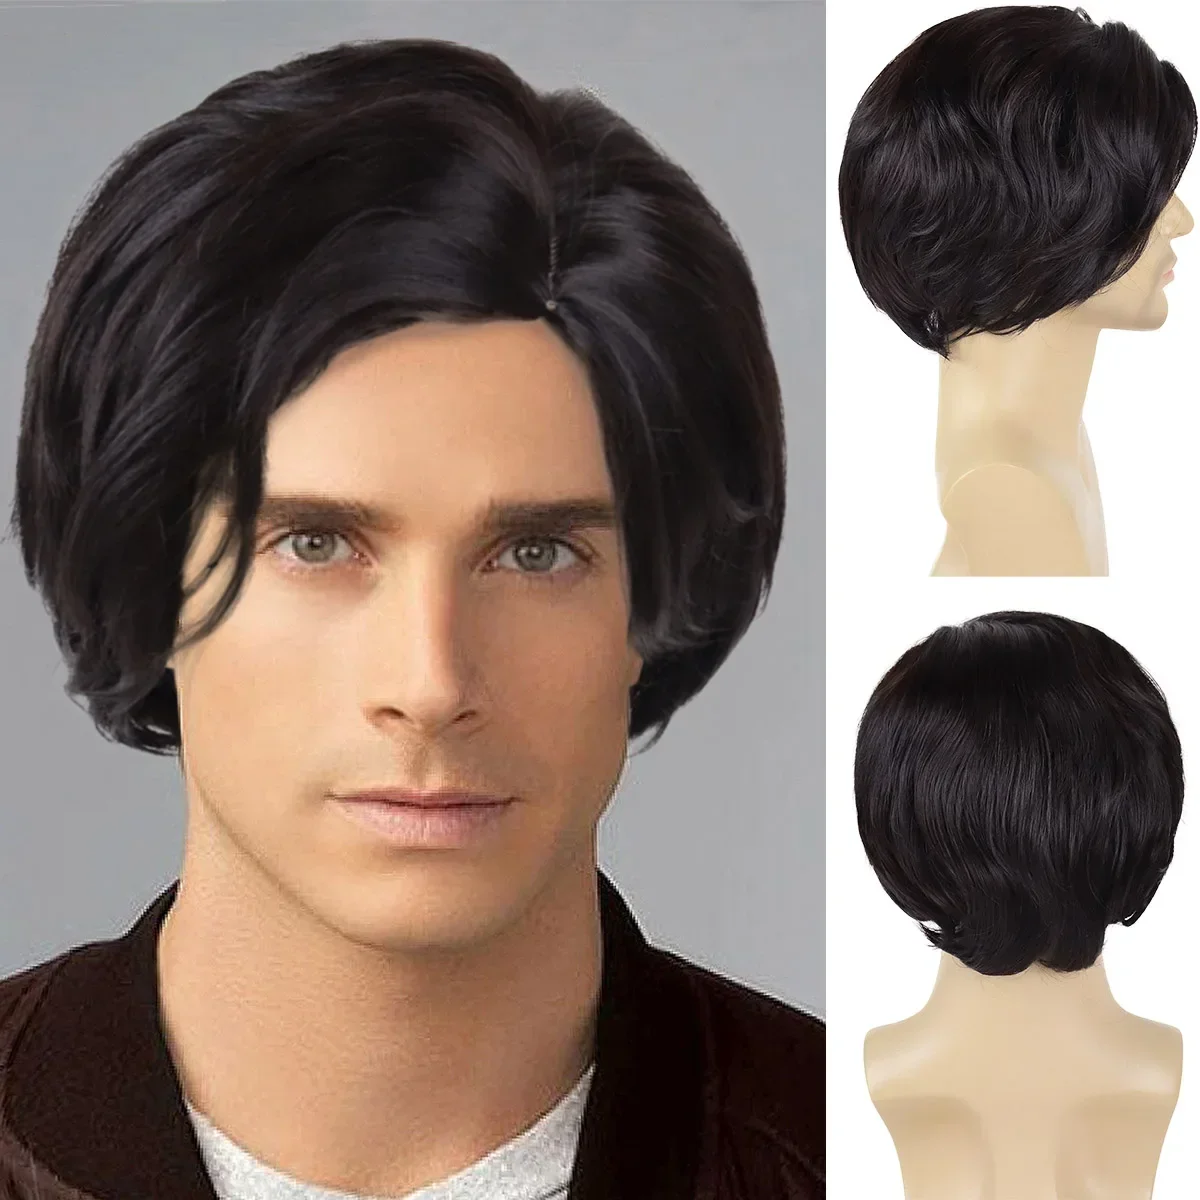 

GNIMEGIL Synthetic Man Wig with Bangs Side Parting Wigs for Men Short Wig Curly Hairstyle Natural Black Hair Daily Use Male Wig